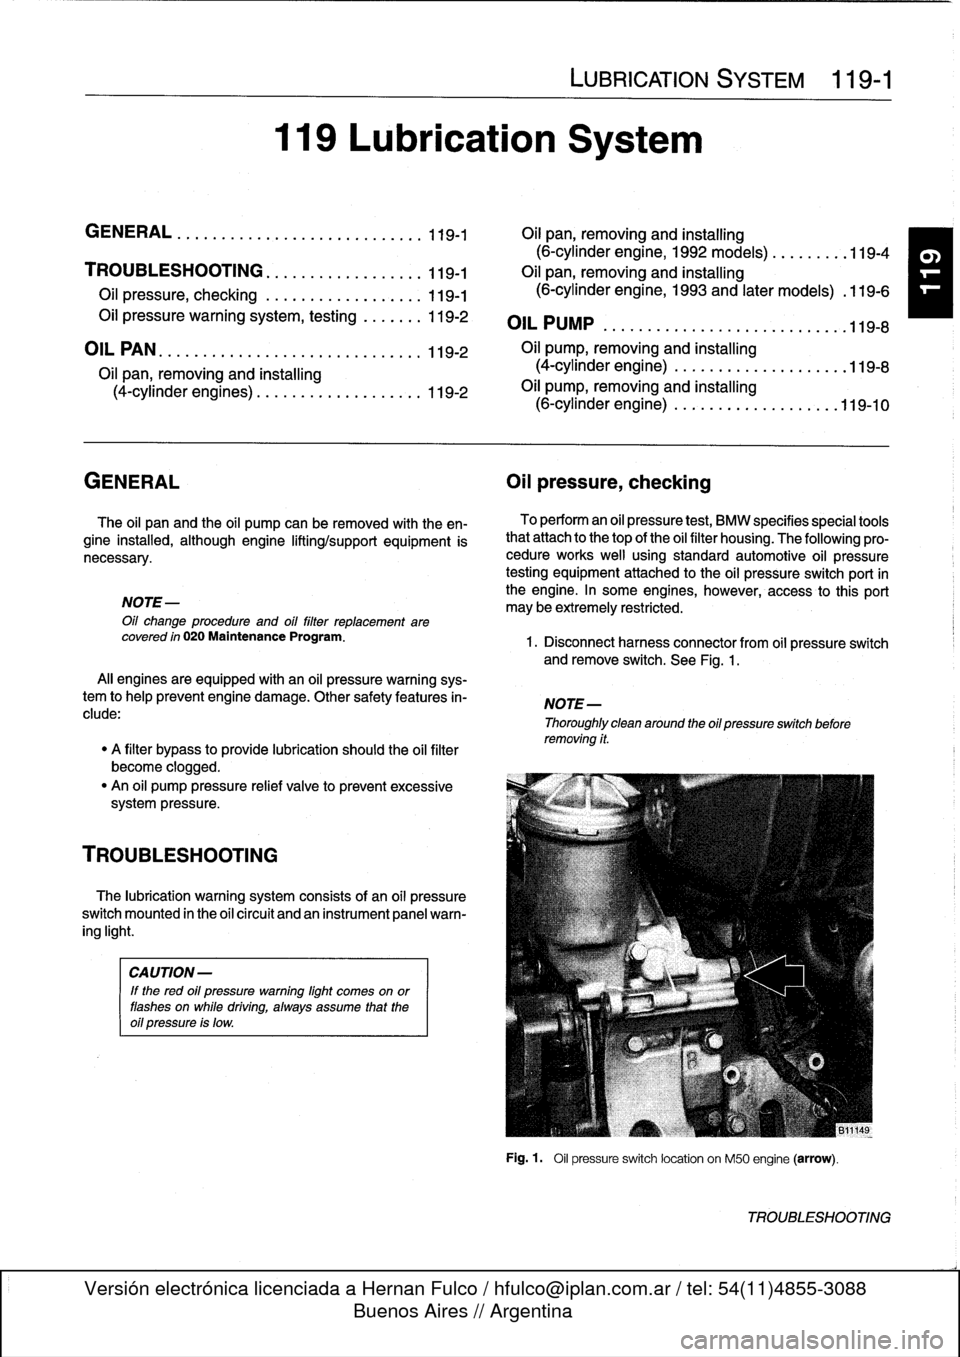 BMW 325i 1994 E36 Service Manual 
119
Lubrication
System

LUBRICATION
SYSTEM

	

119-1

GENERAL
.
.
.
.
.
.
...
.
.
.
.
.
.
.
...,
,
...
.
.
.
.
119-1

	

OH
pan,
removing
and
installing

(6-cylinder
engine,
1992
models)
.
.
.
.
.
.
